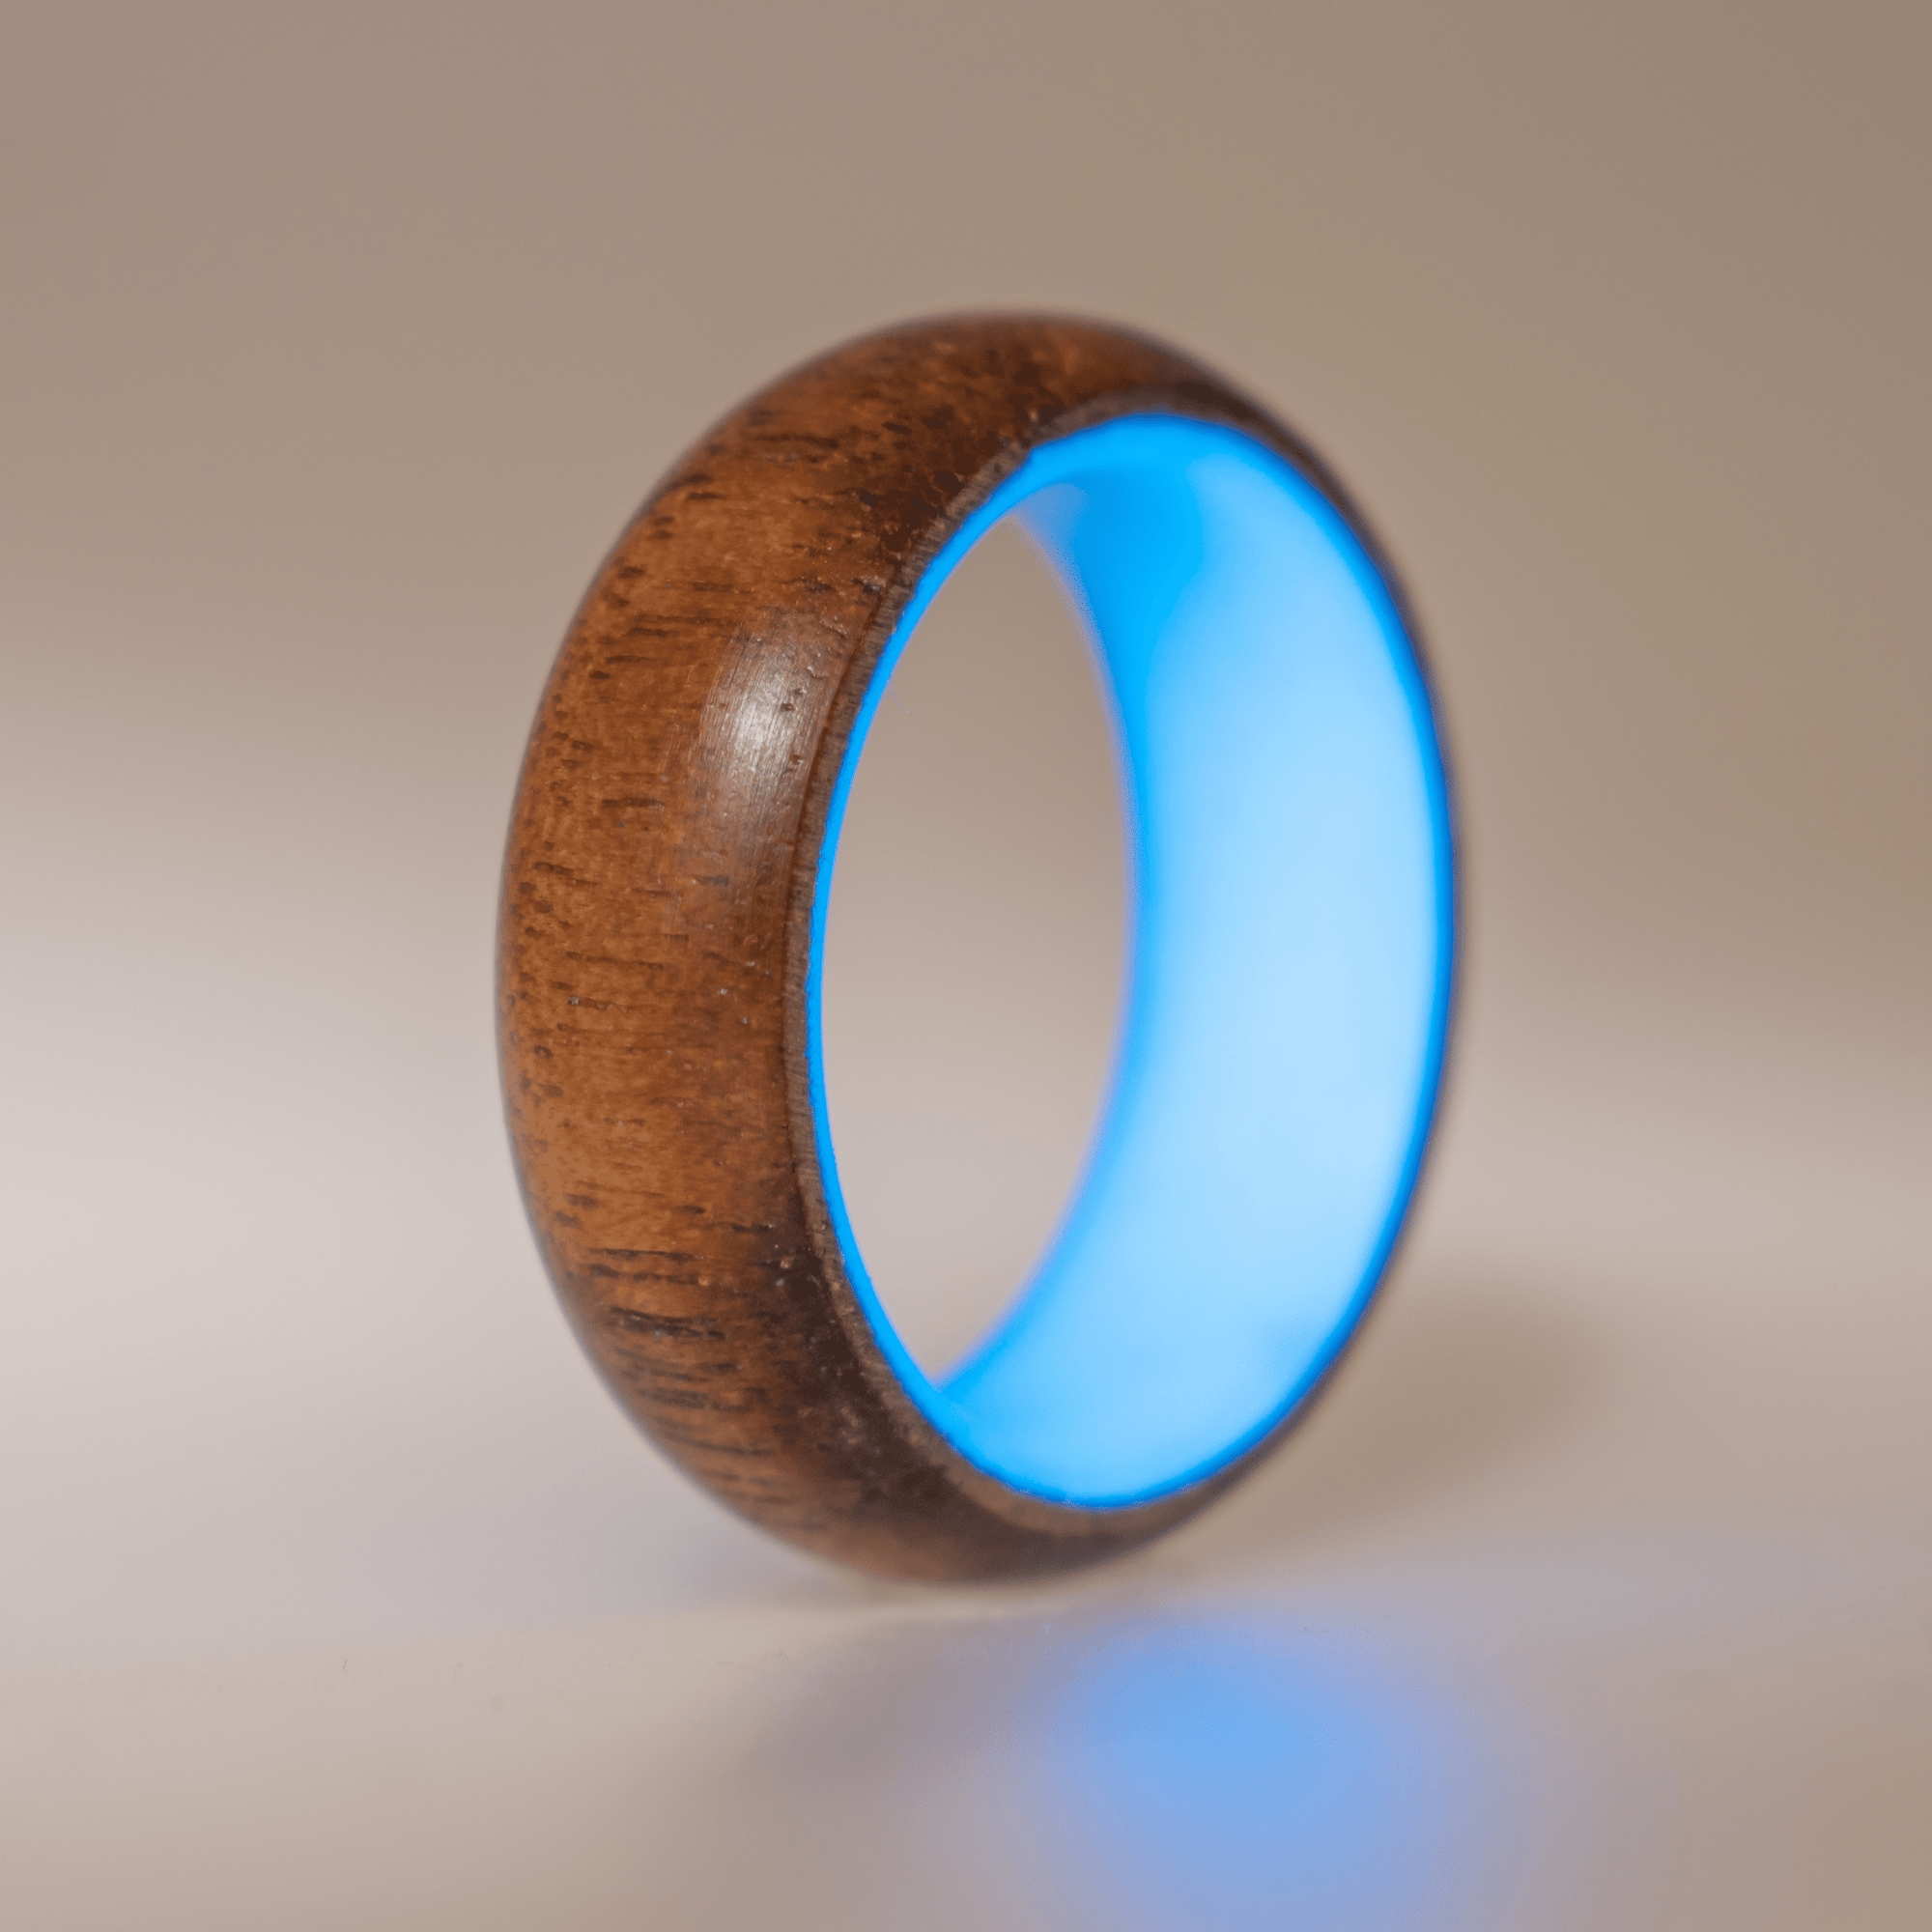 Blue glow ring with walnut wood exterior. 